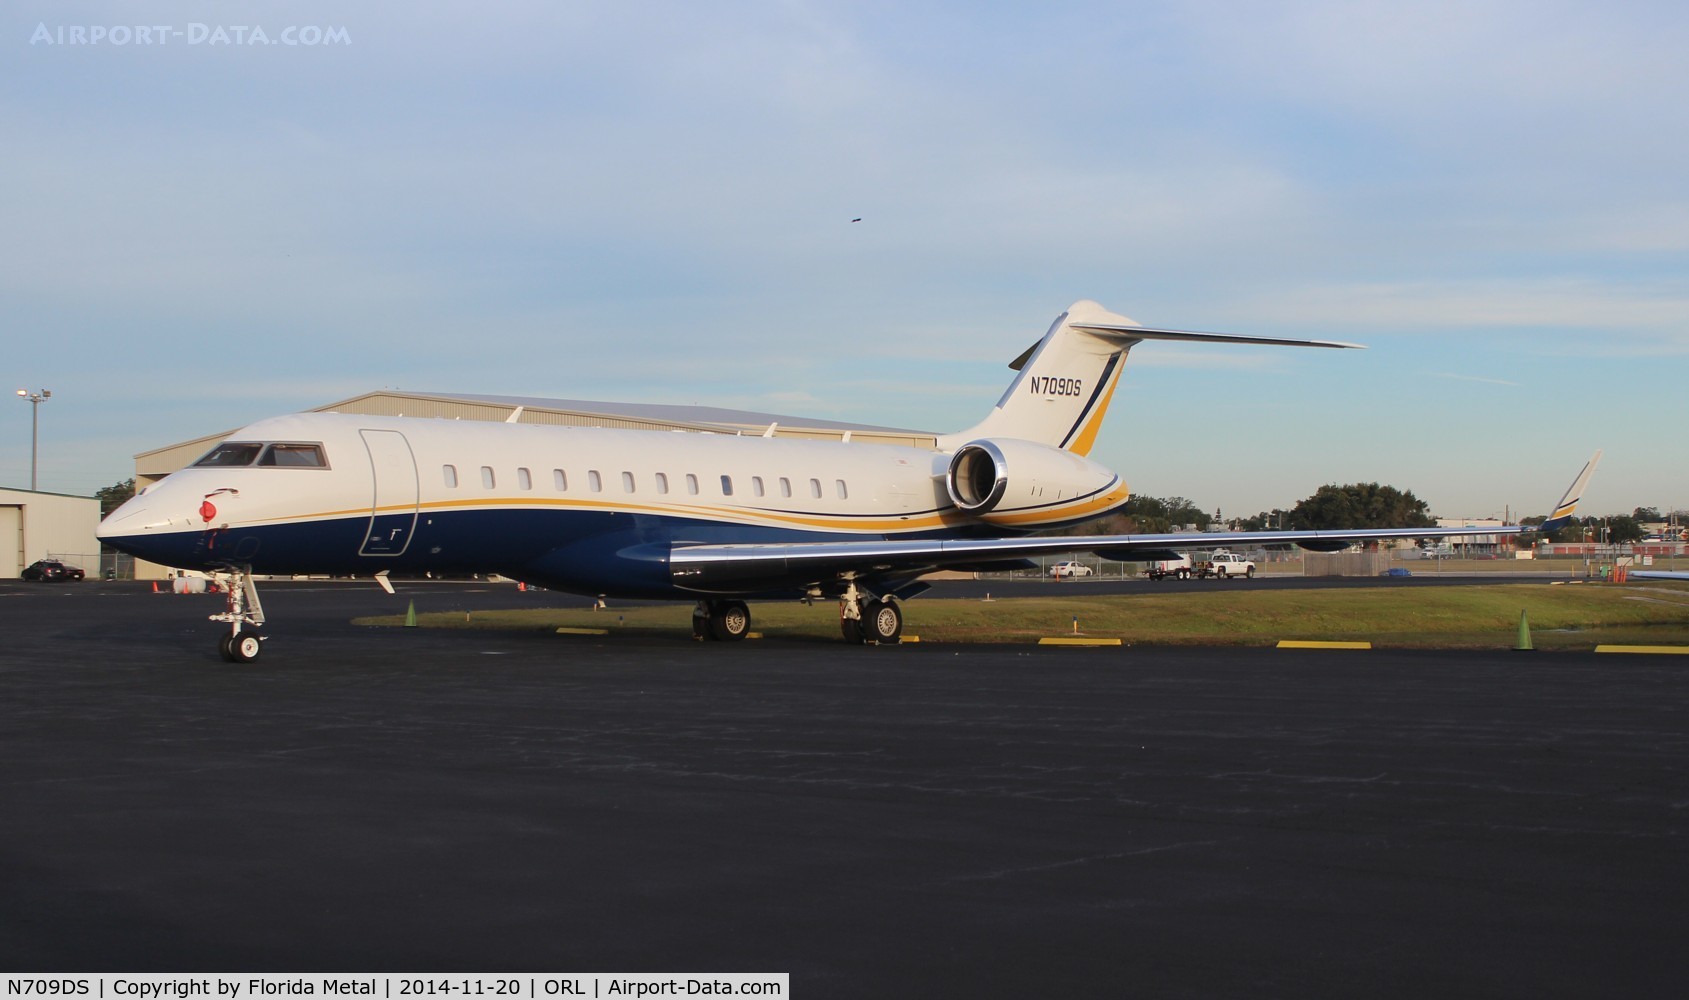 N709DS, 2008 Bombardier BD-700-1A10 Global Express XRS C/N 9278, Global Express